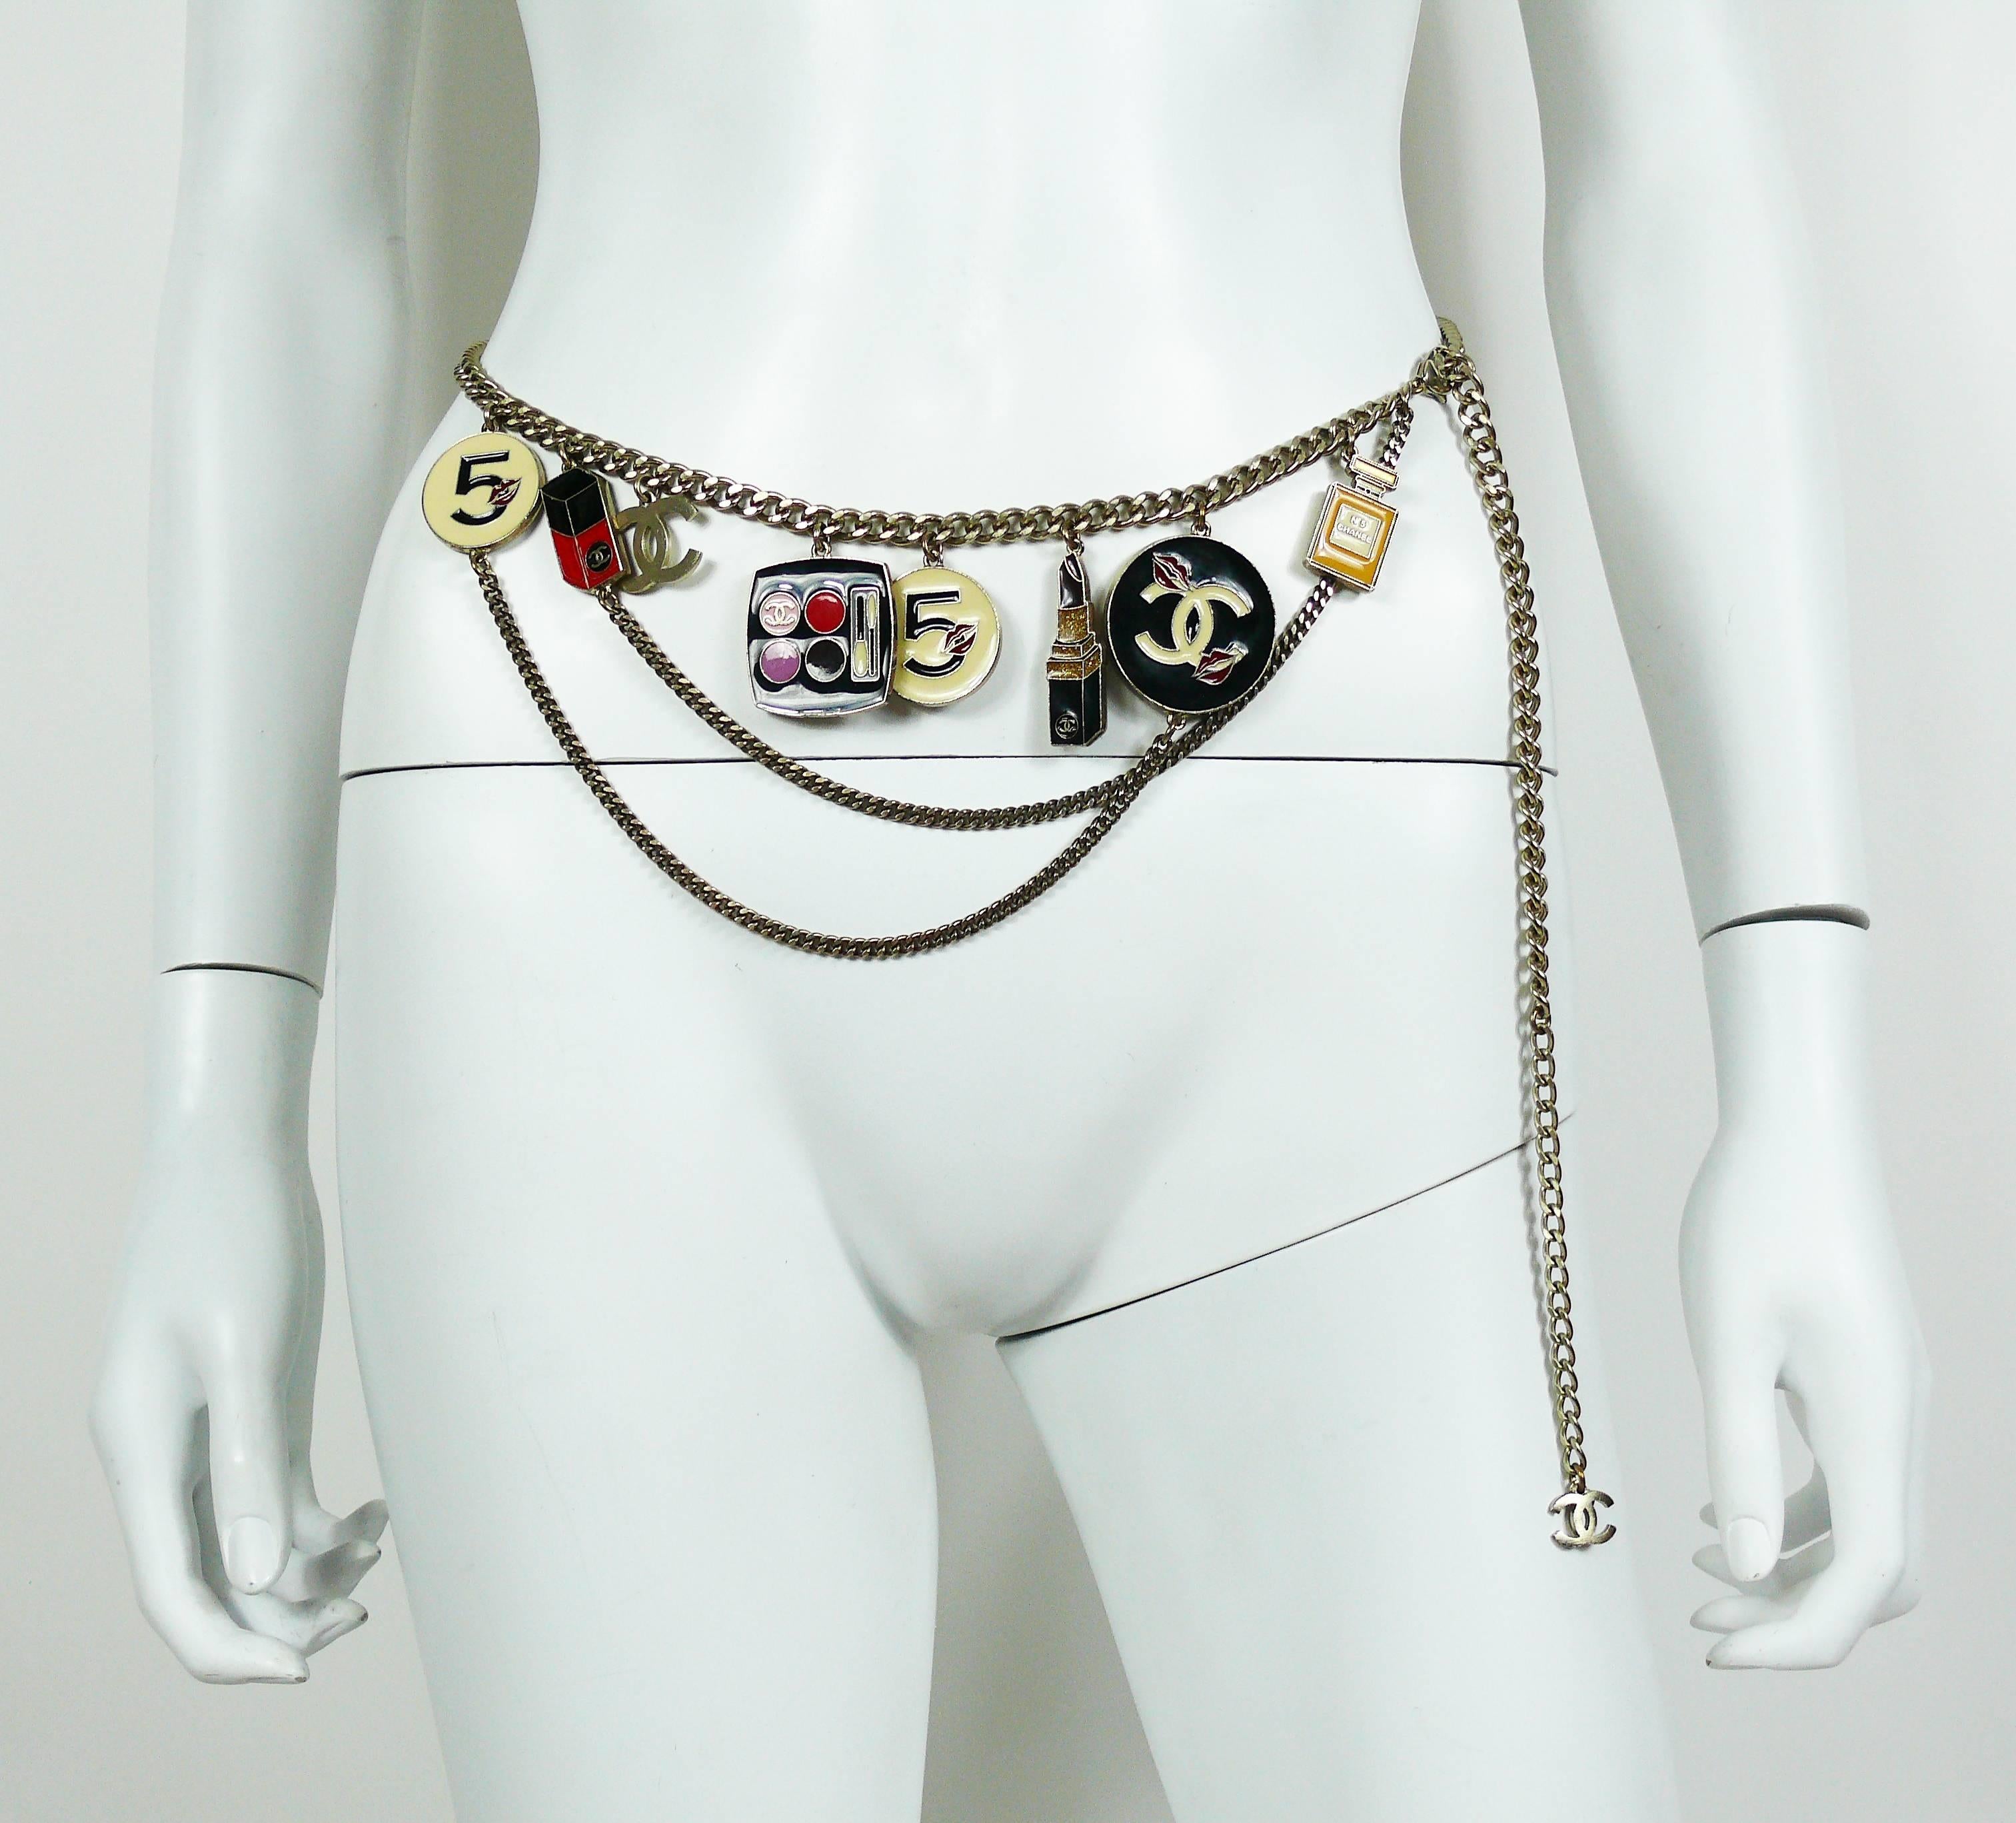 CHANEL rare make-up charm runway belt.

Fall/Winter 2004 Ready-to-Wear collection.
Look 43.

May we worn as a necklace.

This belt features :
- Multi strand silver toned chains.
- Seven large enamel make-up charms (Chanel N°5 perfume bottle,